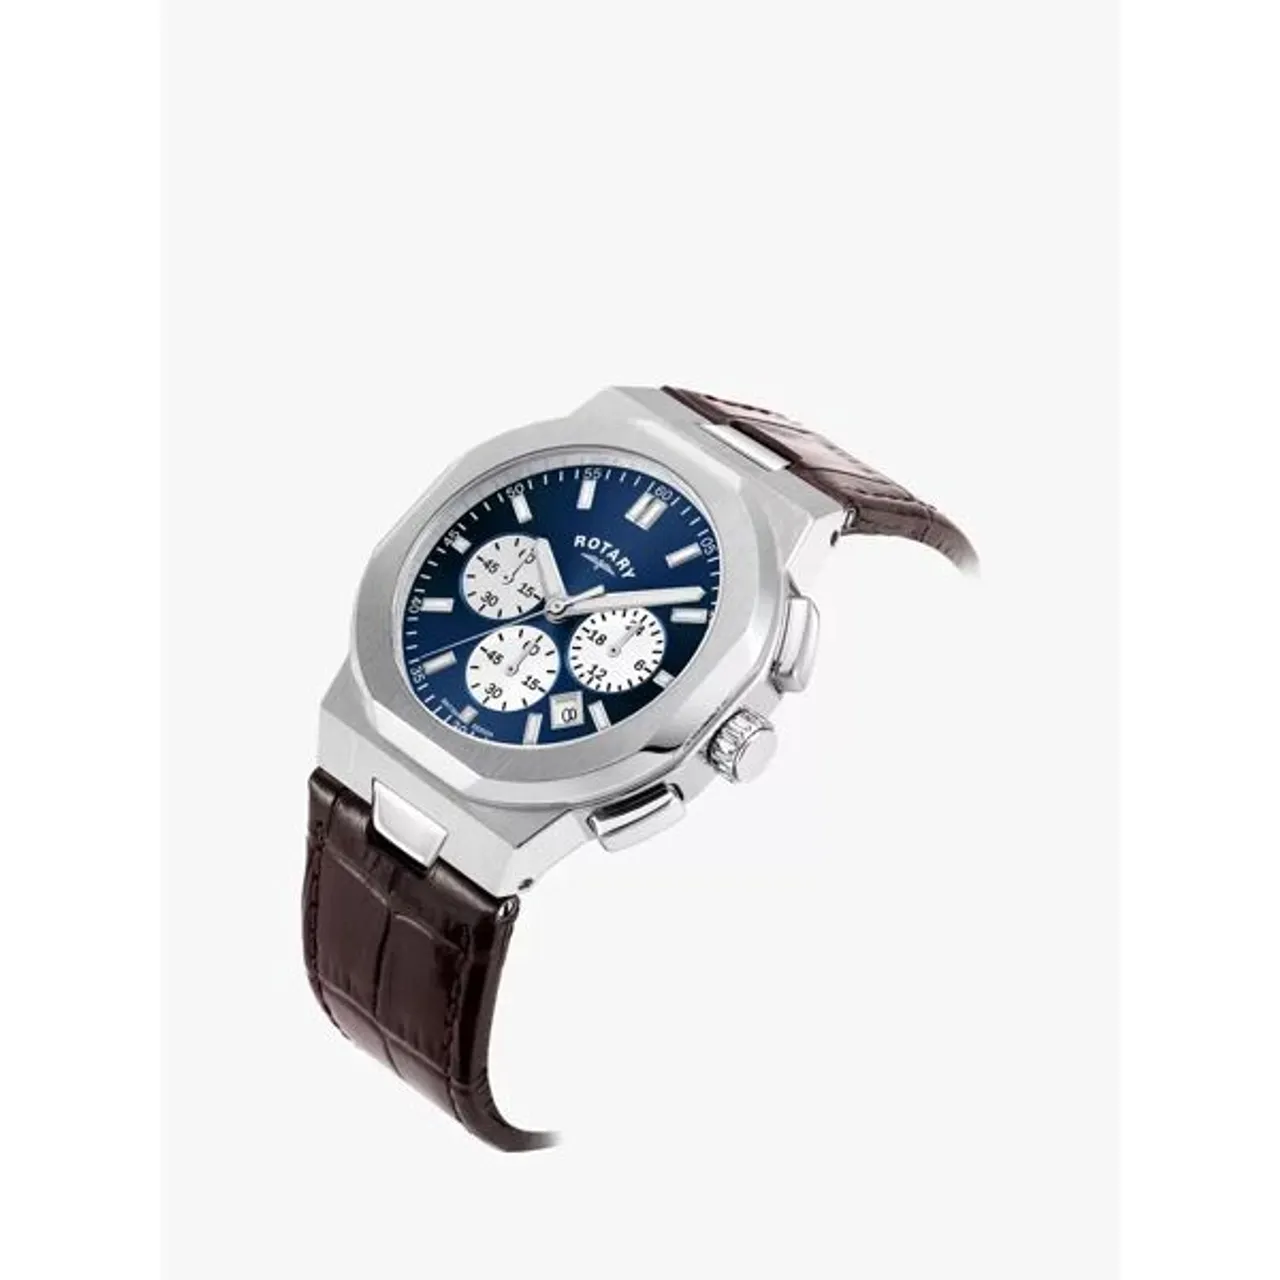 Rotary GS05450/05 Men's Regent Chronograph Date Leather Strap Watch, Silver/Blue - Silver/Blue - Male